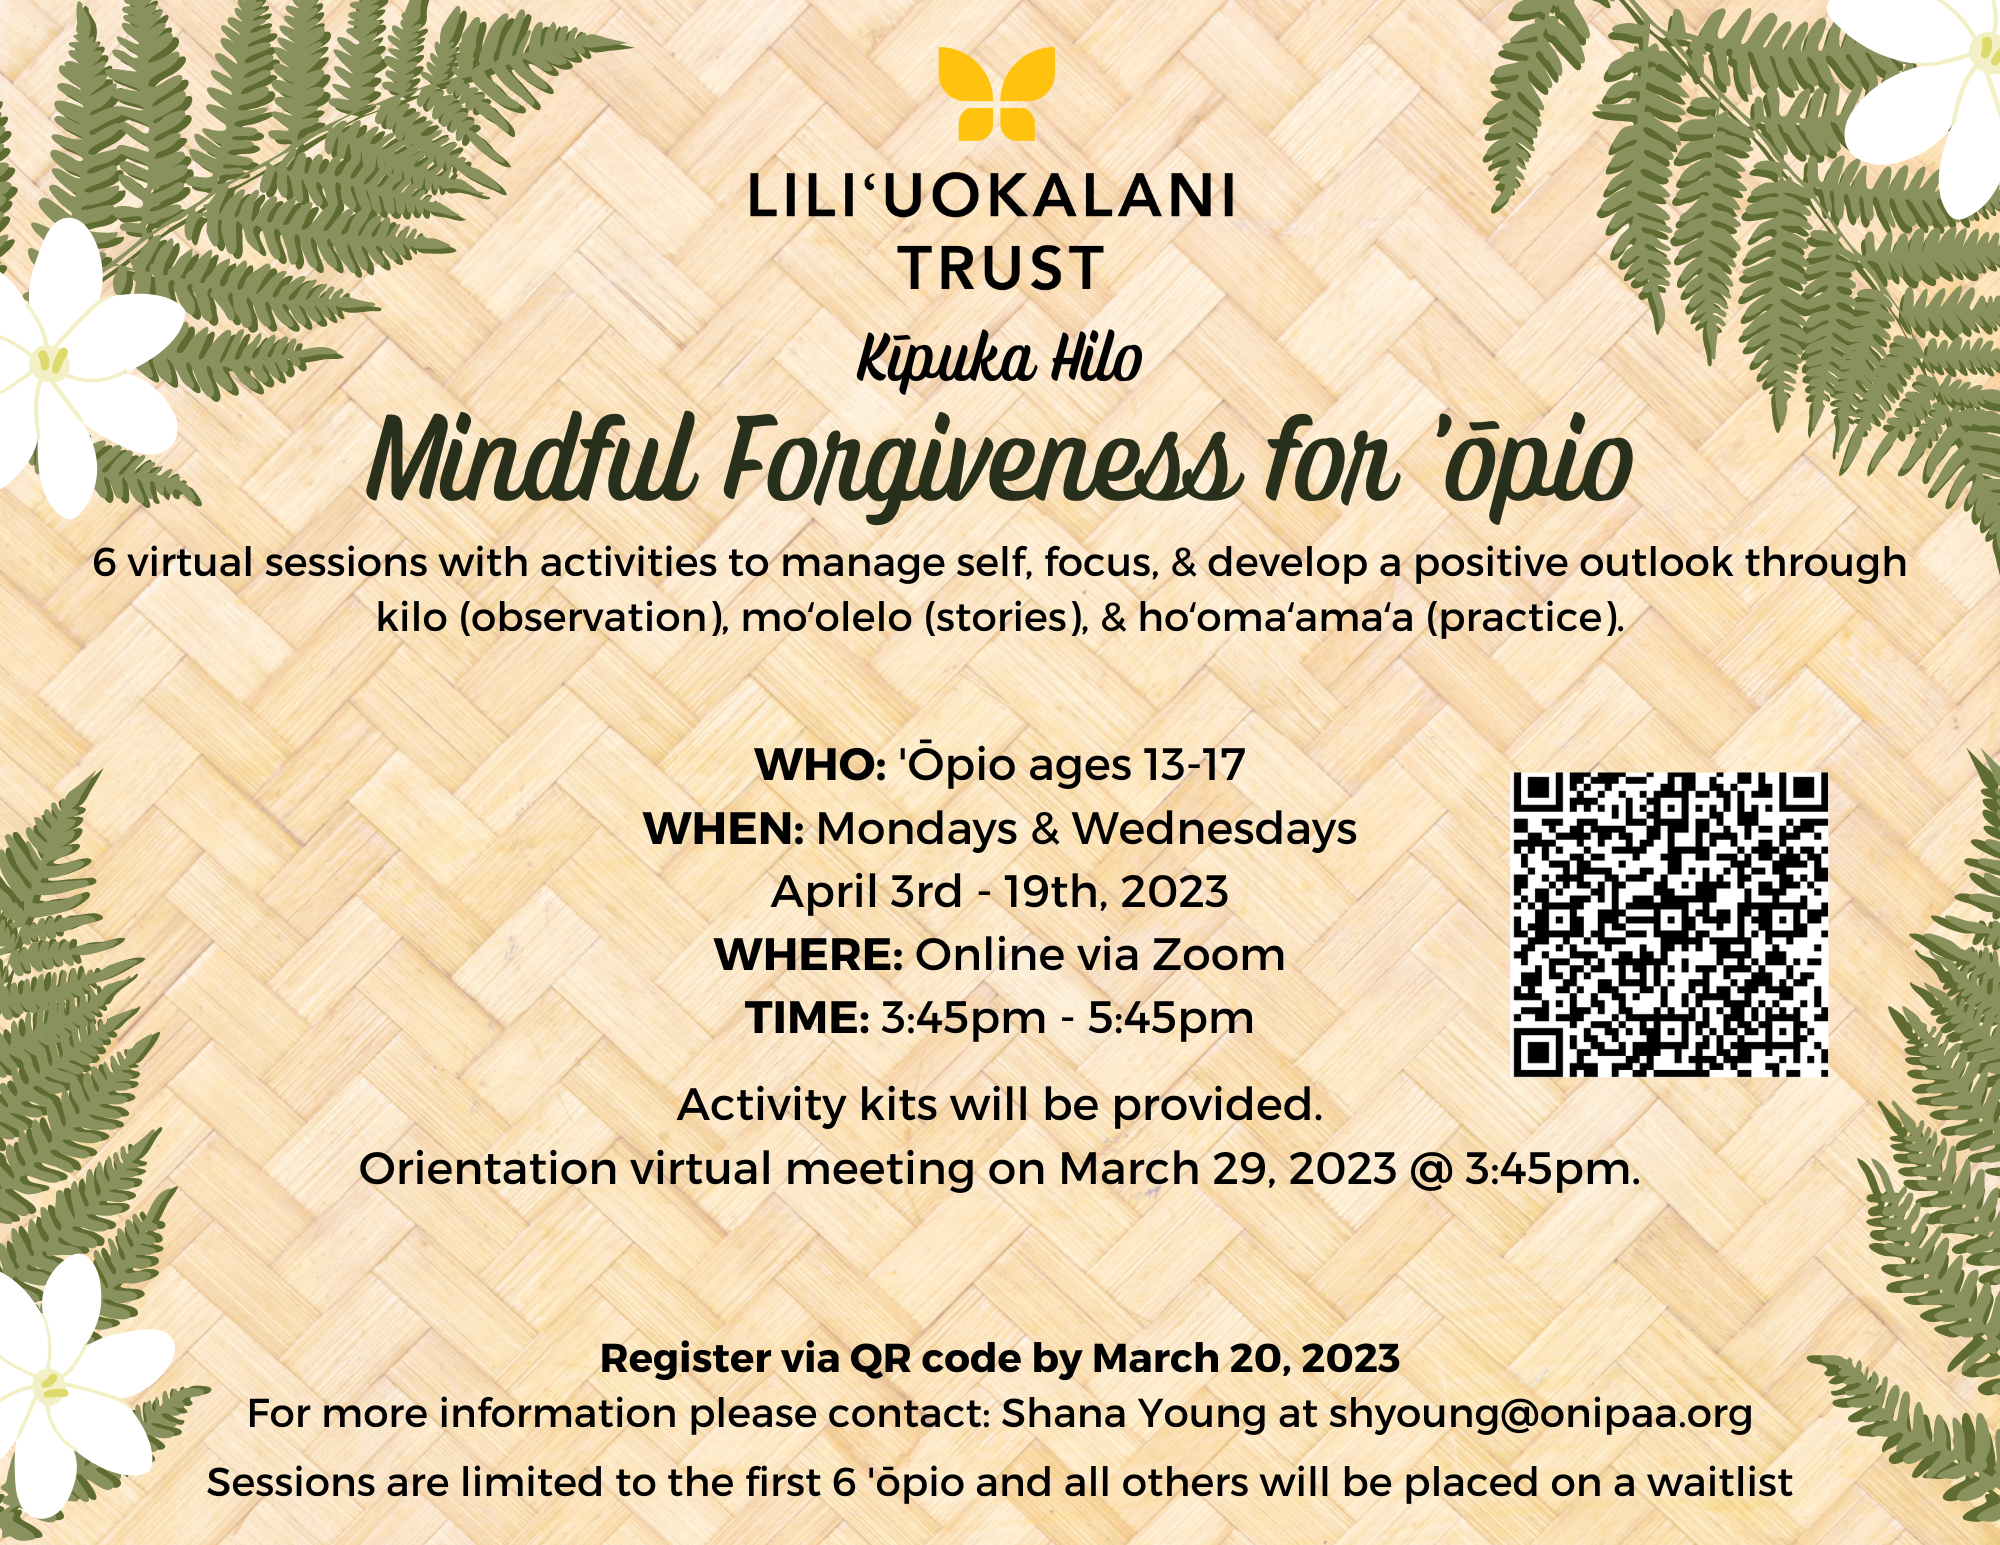 A flyer for Mindful Forgiveness 2023.